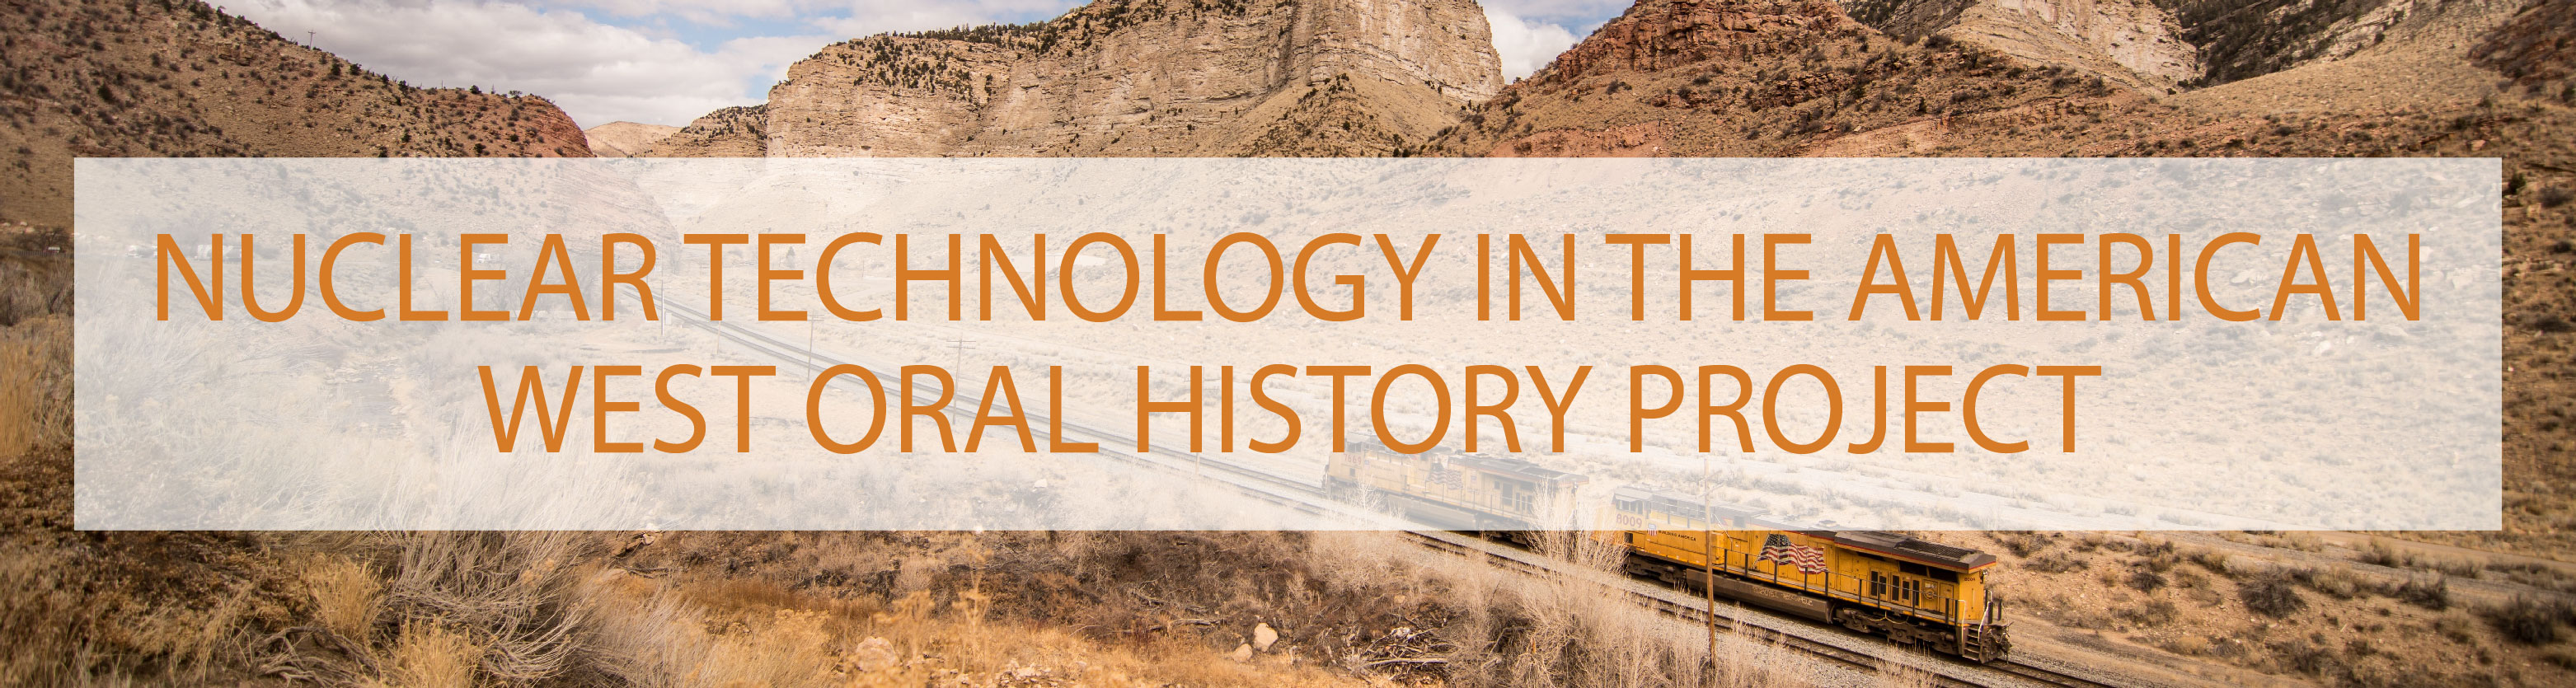 Nuclear Technology in the American West Oral History Project